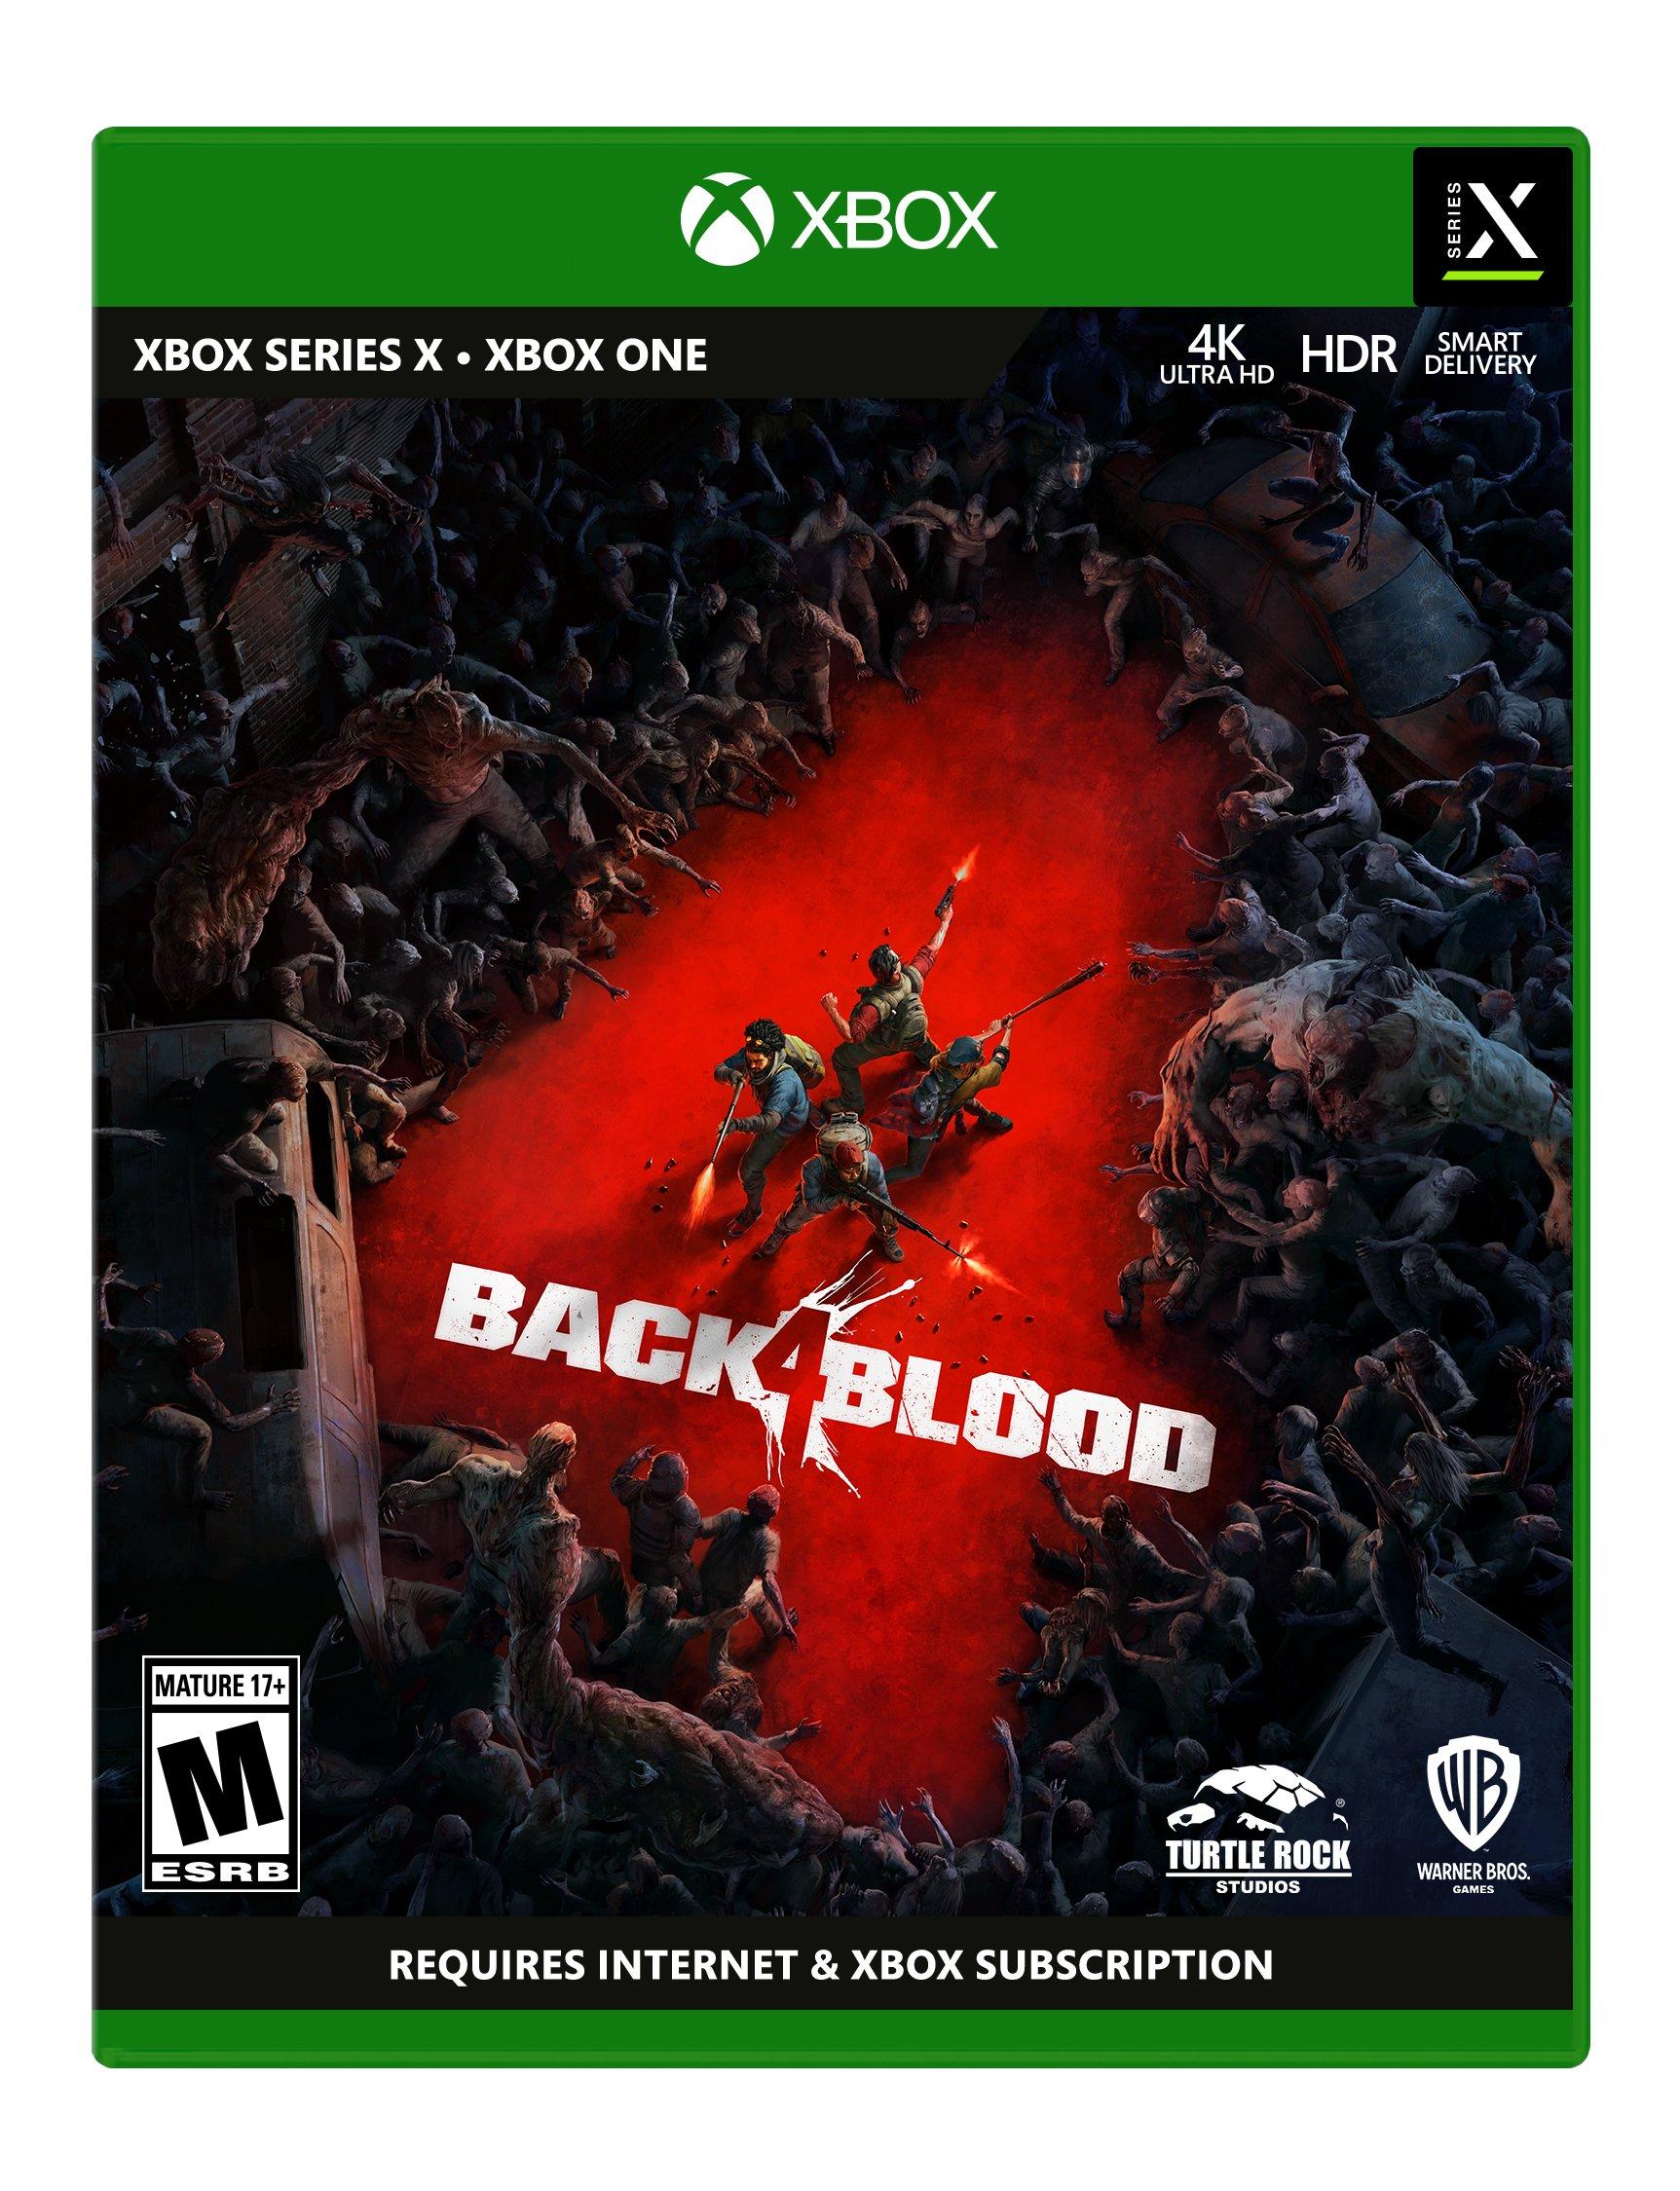 Back 4 Blood Appears to be Coming to Xbox Game Pass for Console and PC on